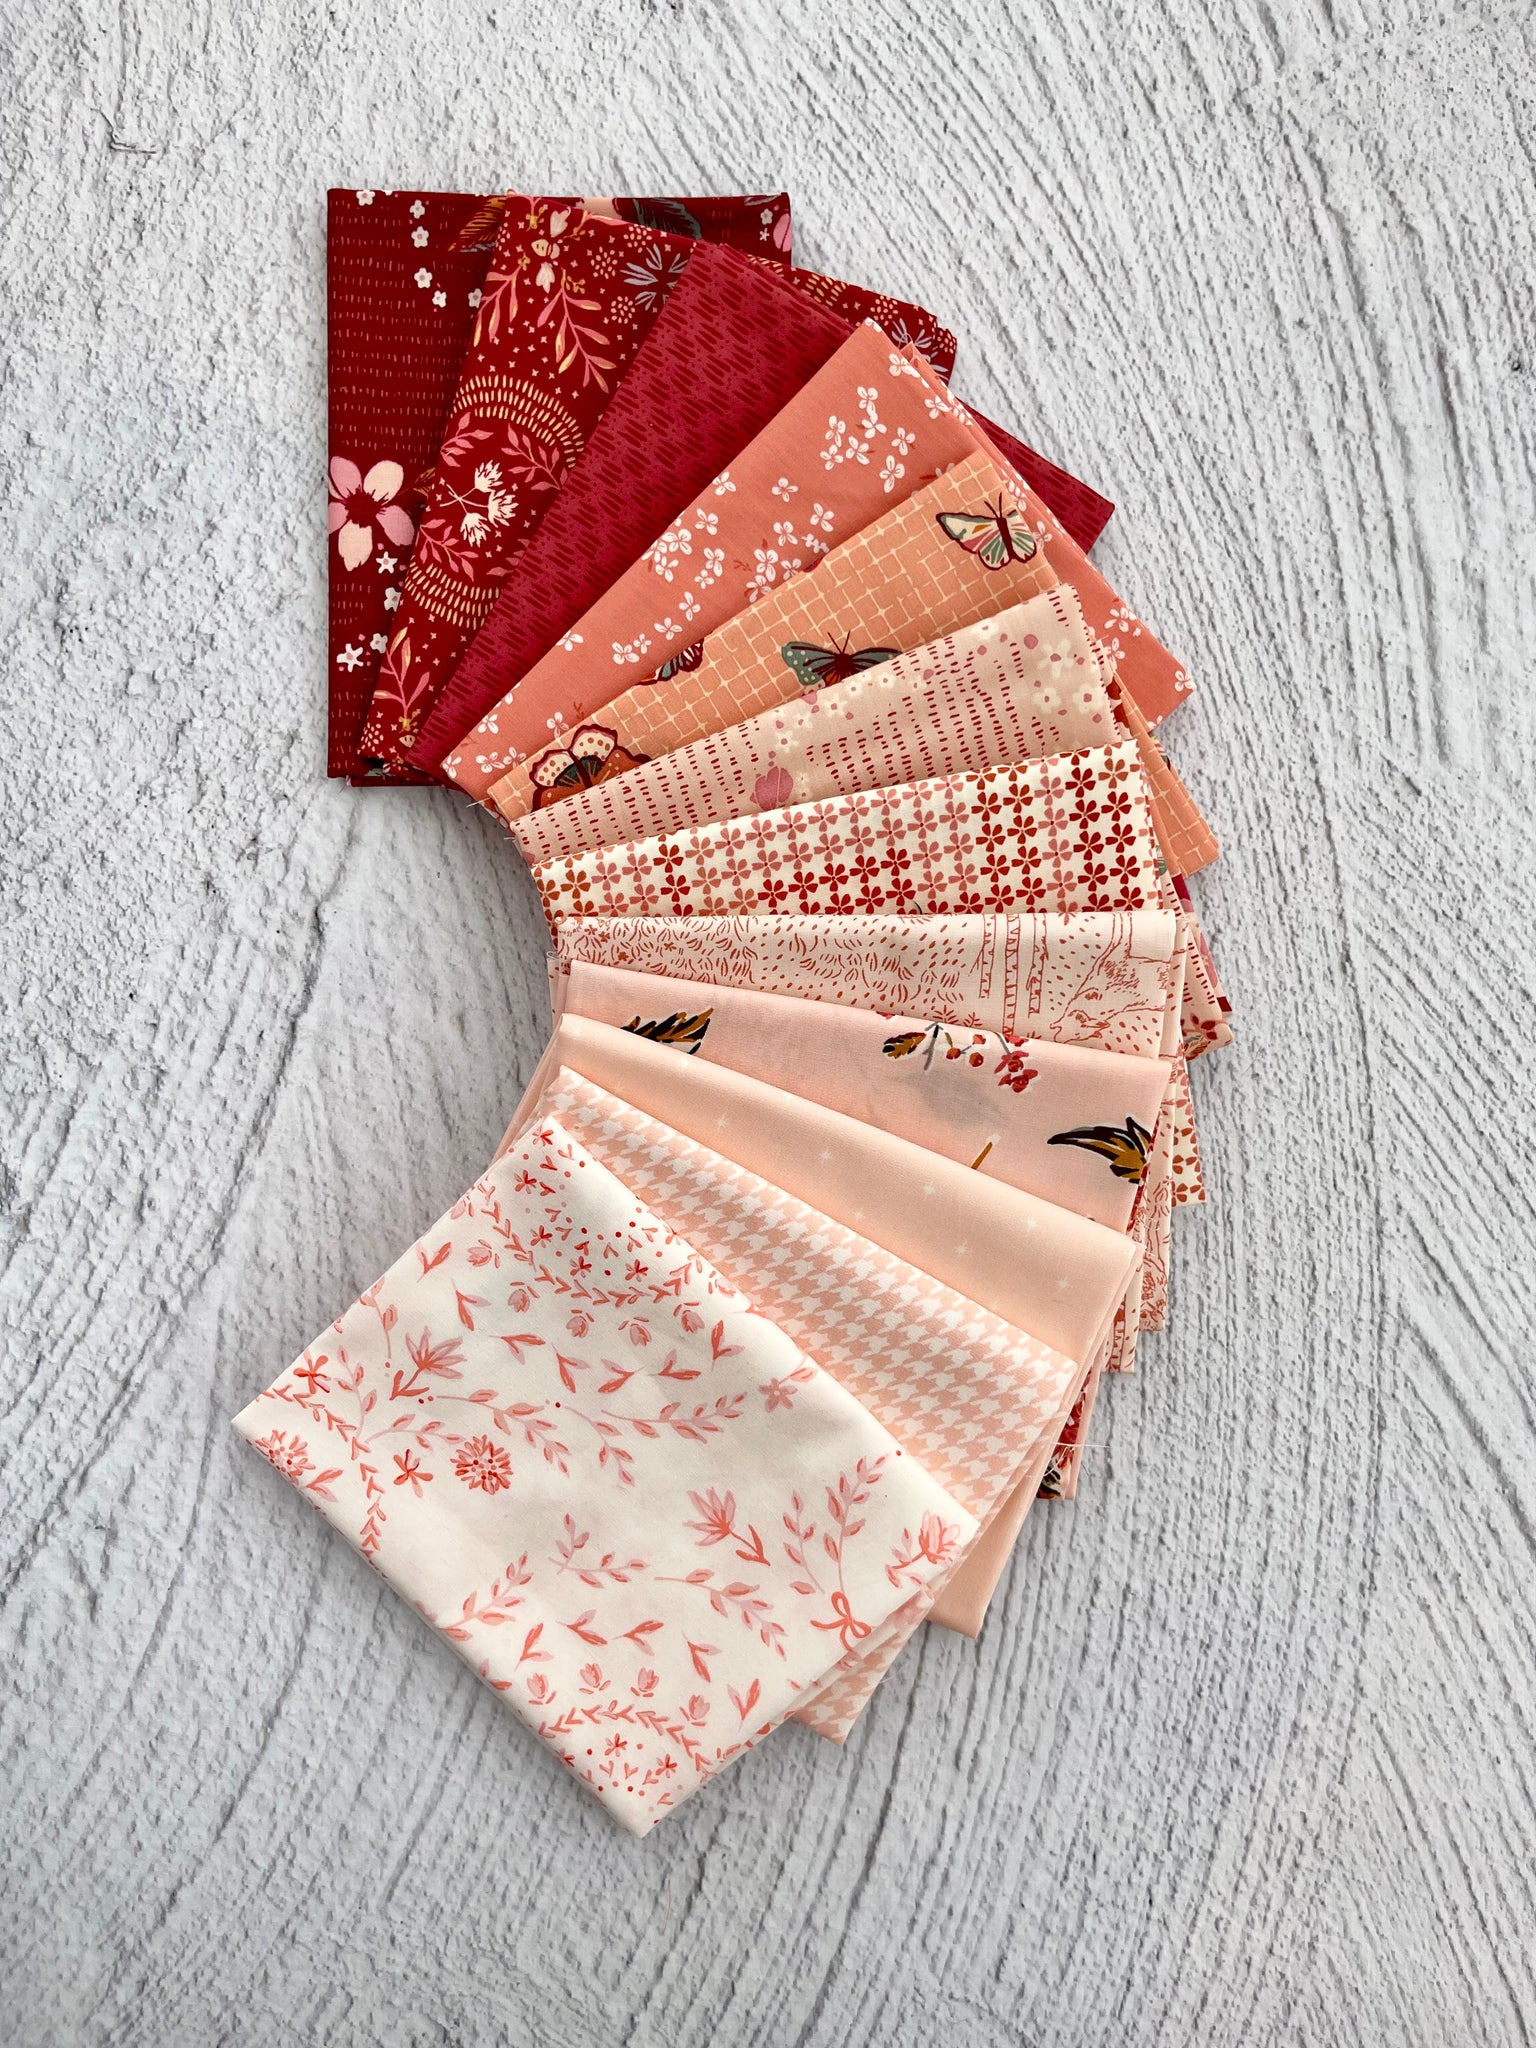 Raspberry Punch - Curated 12 Fat Quarter Bundle